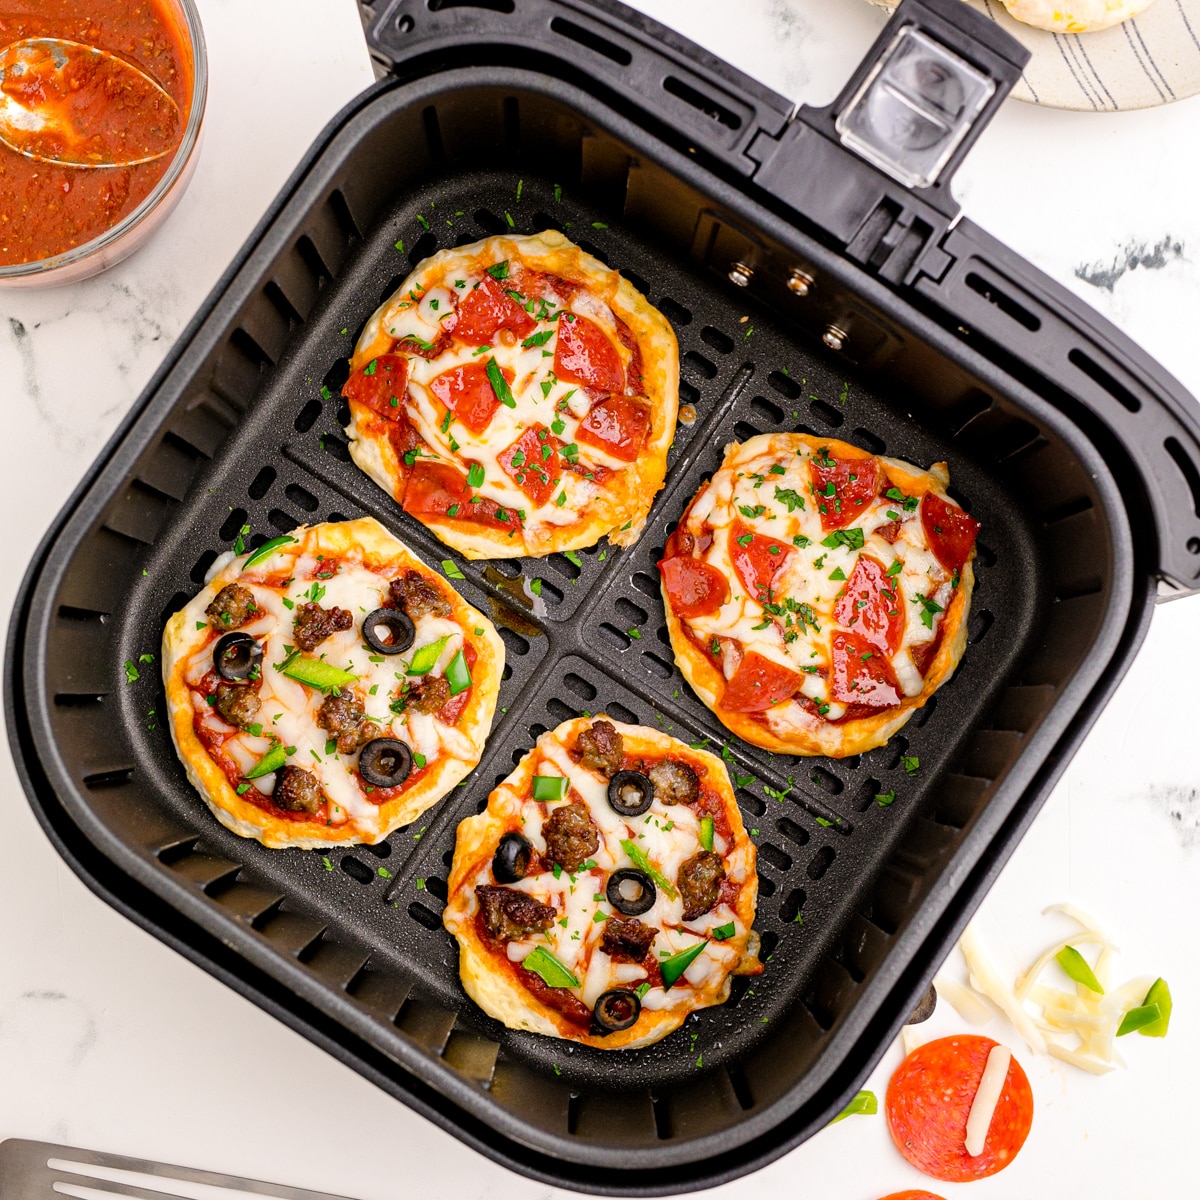 Mini pizzas baked in an air fryer.